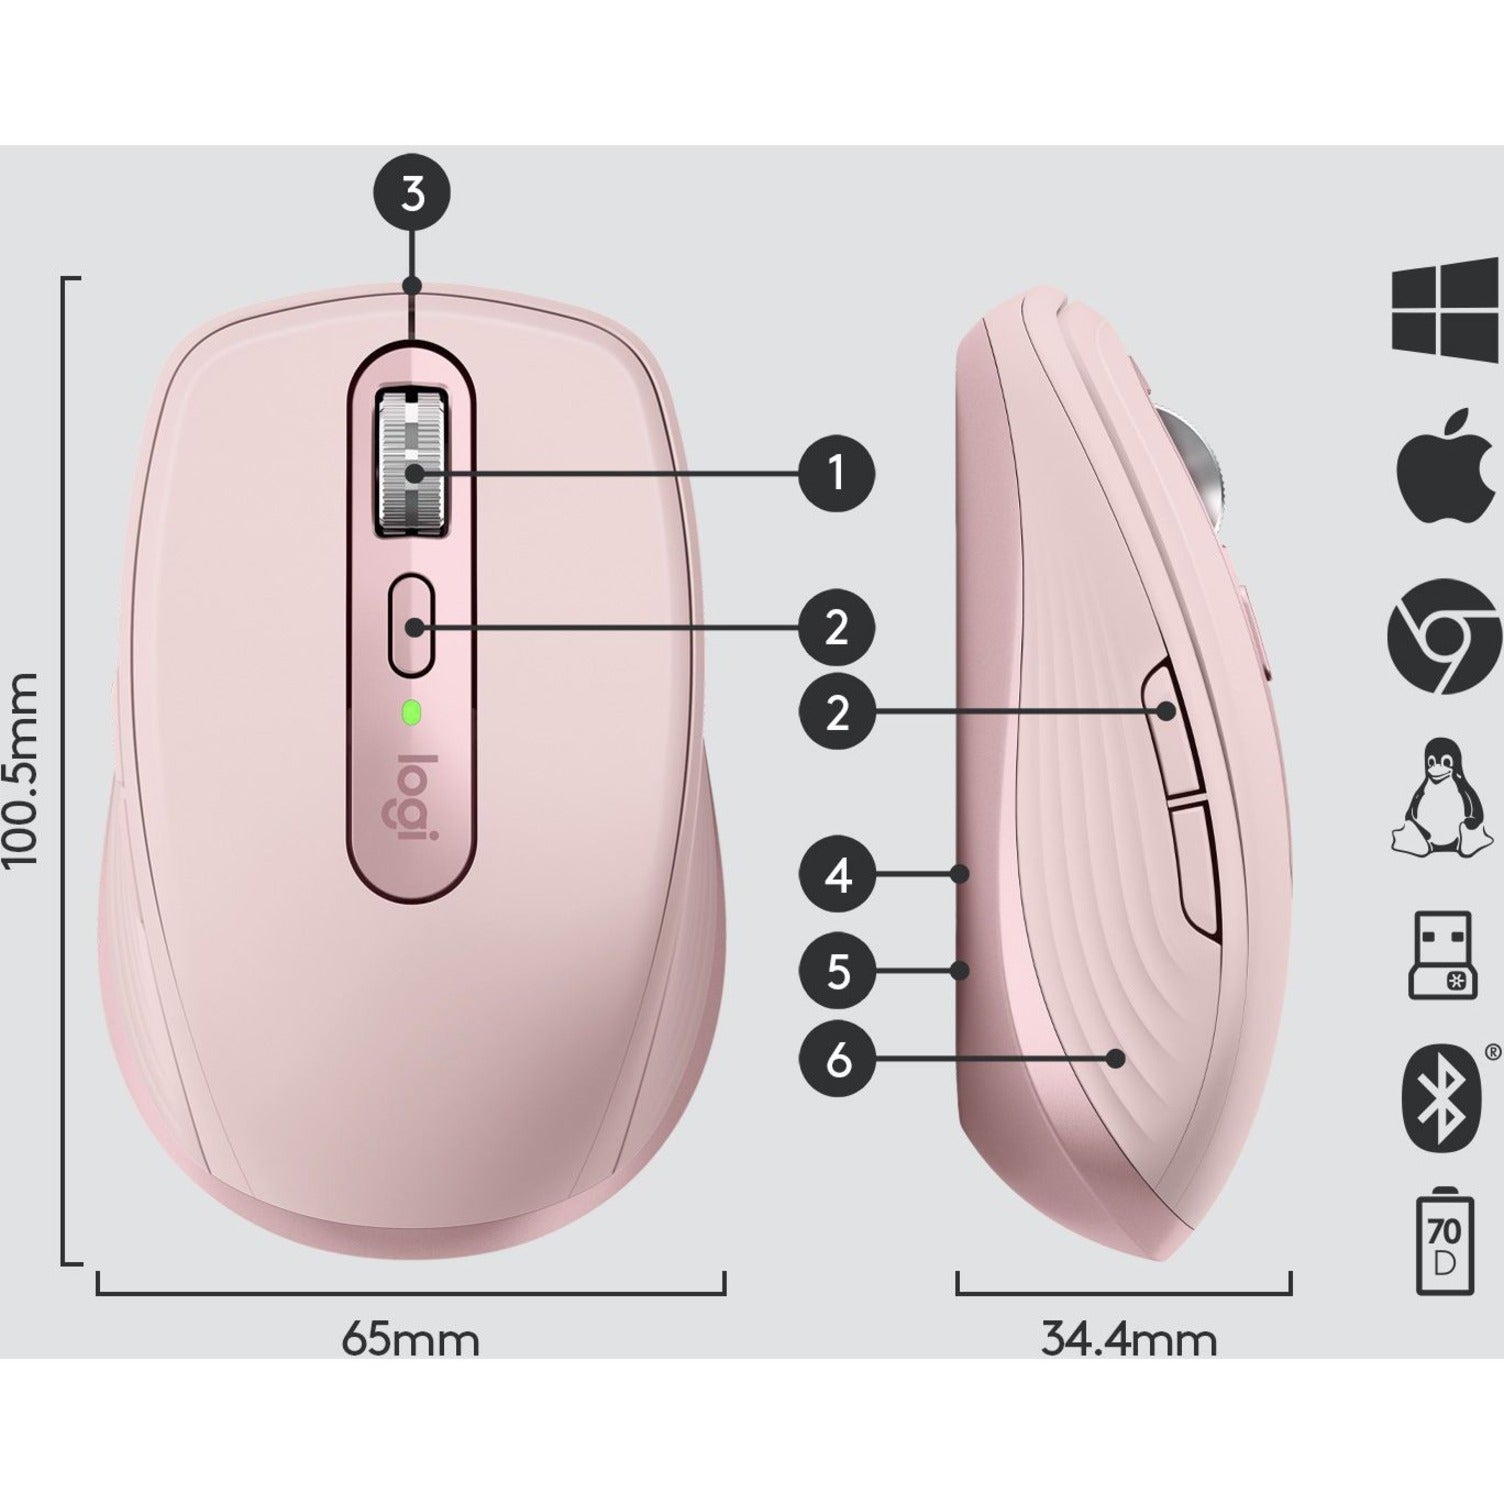 Logitech MX Anywhere 3 Wireless Mouse - Rose (910-005986) [Discontinued]